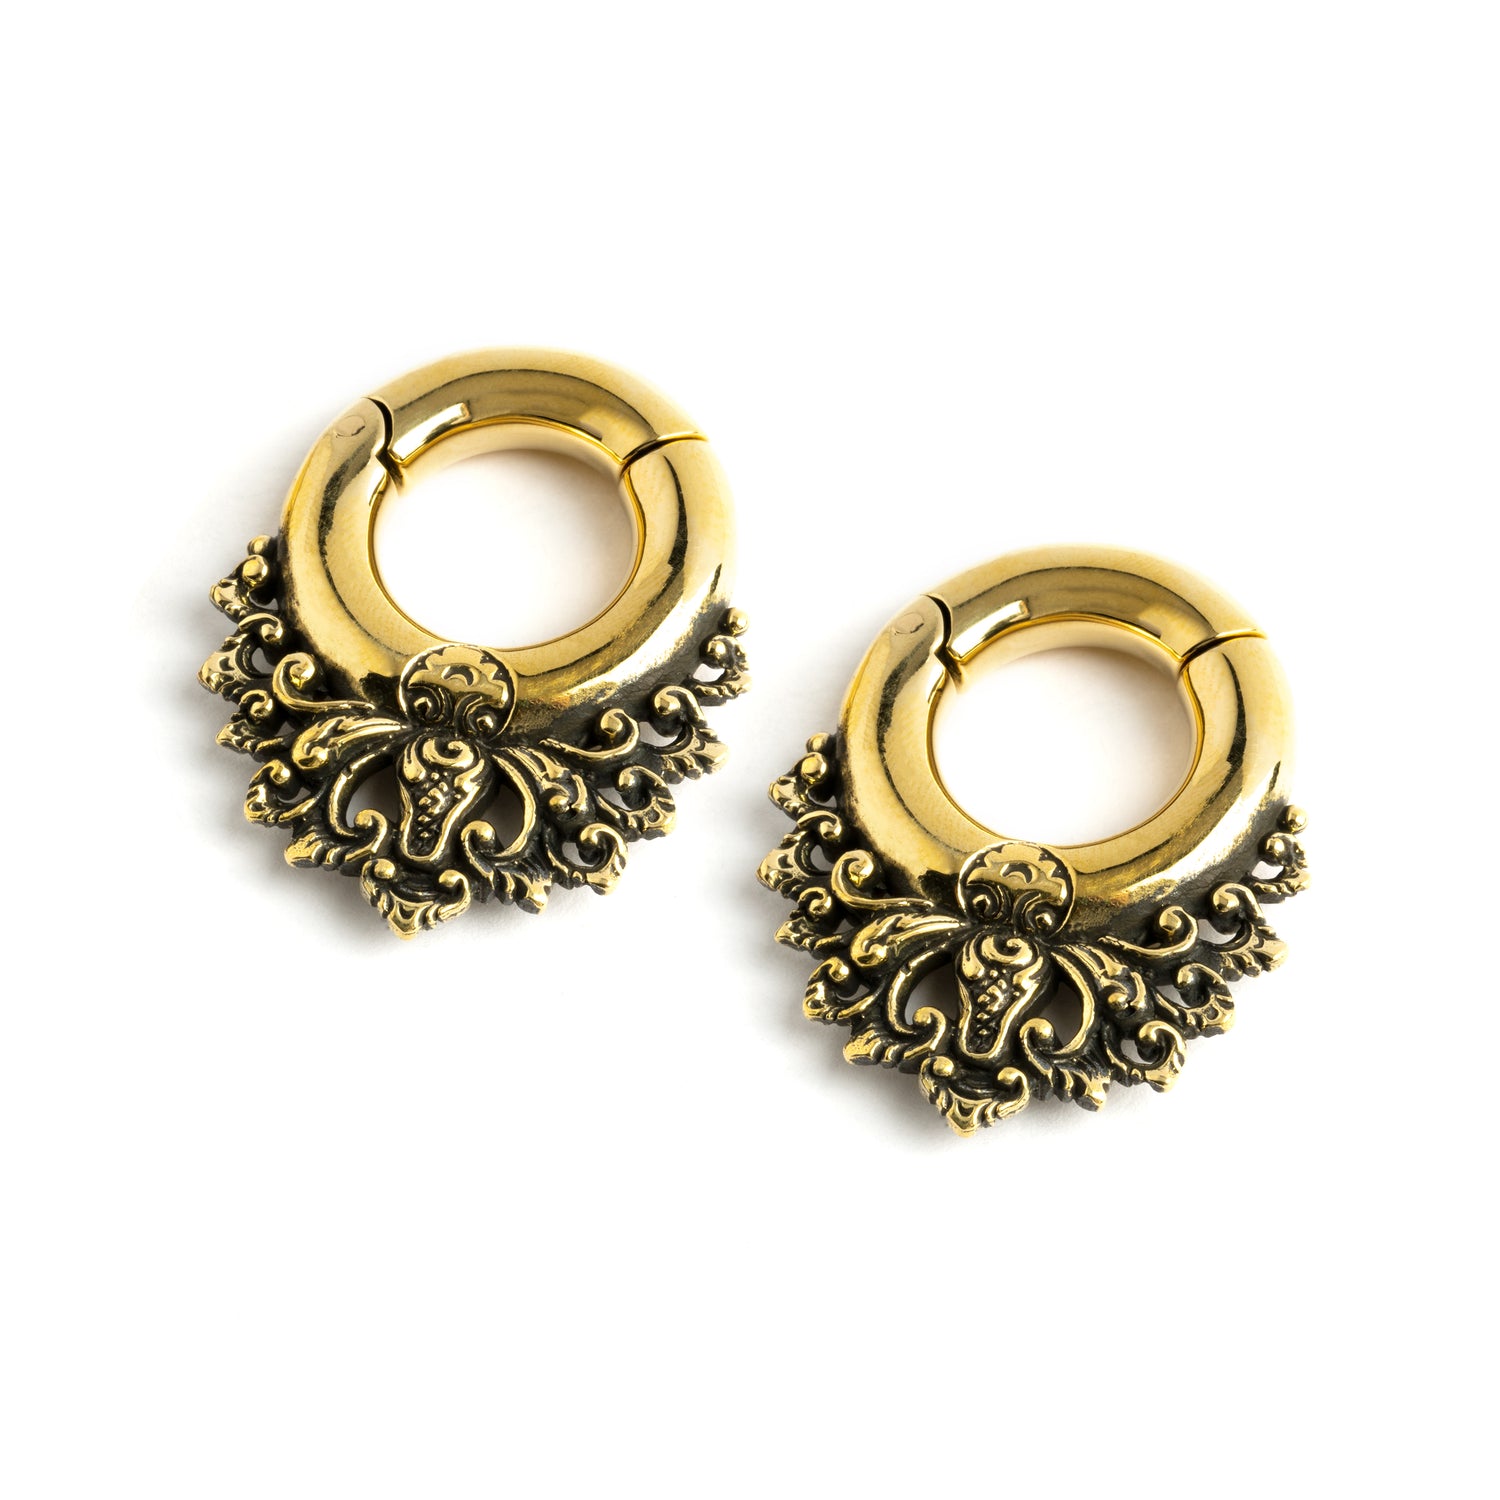 pair of gold brass ear hangers hoops with floral victorian design right front view